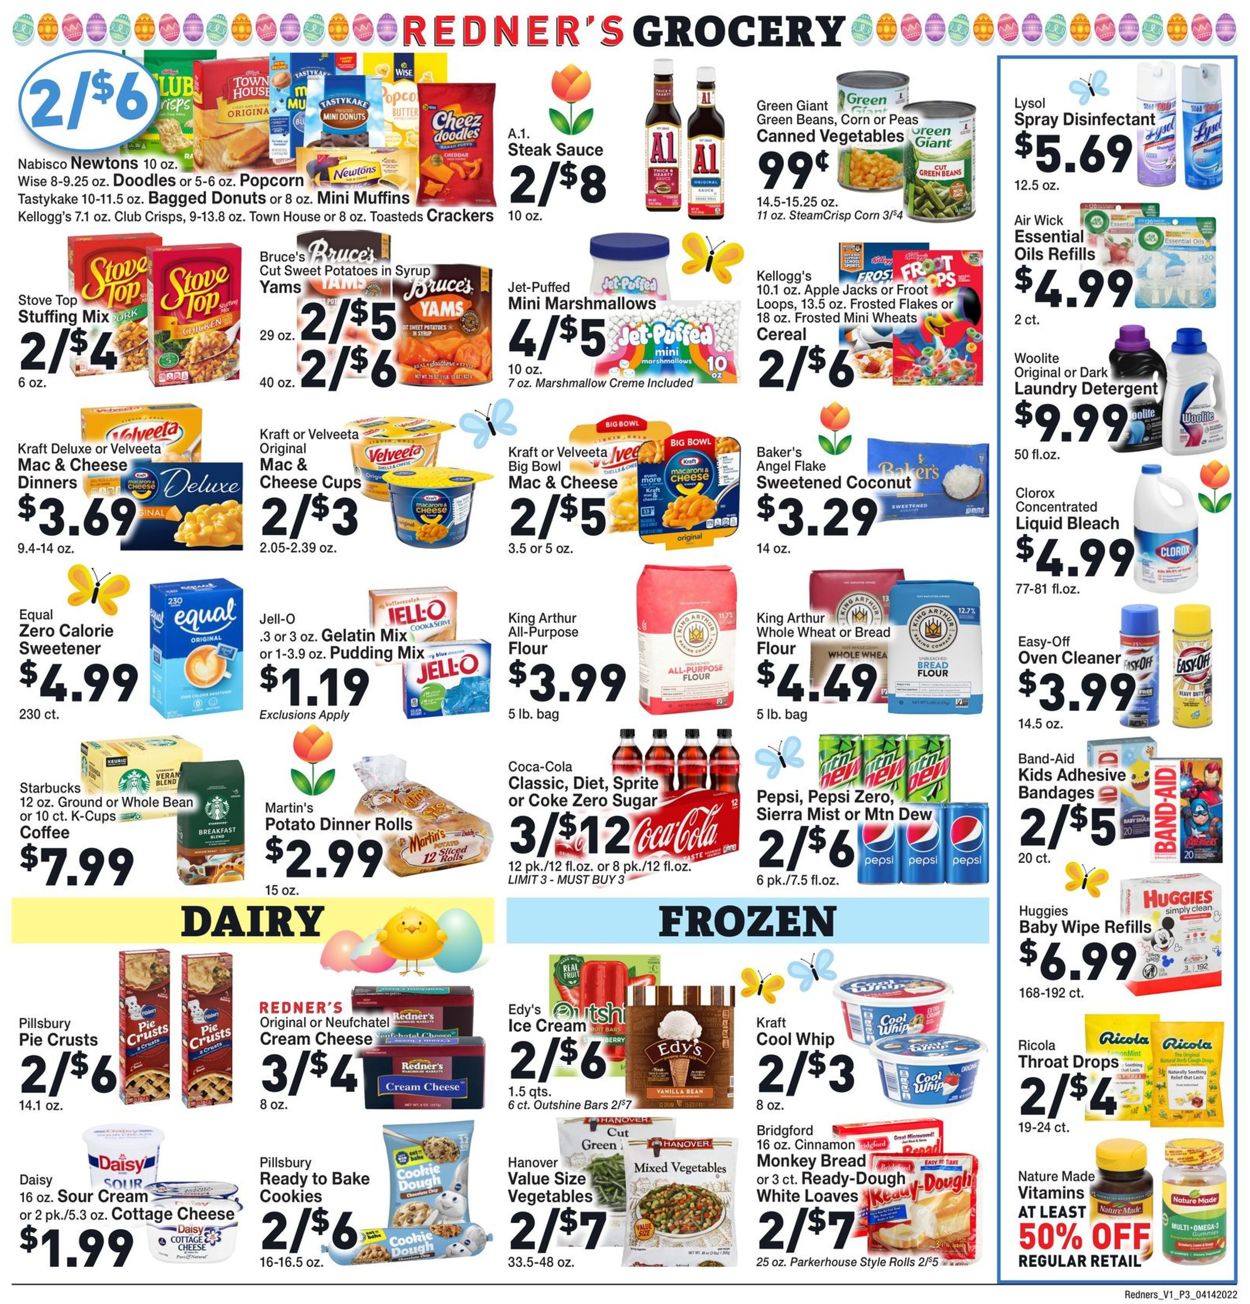 Redner’s Warehouse Market EASTER 2022 Weekly Ad Circular - valid 04/14-04/20/2022 (Page 5)